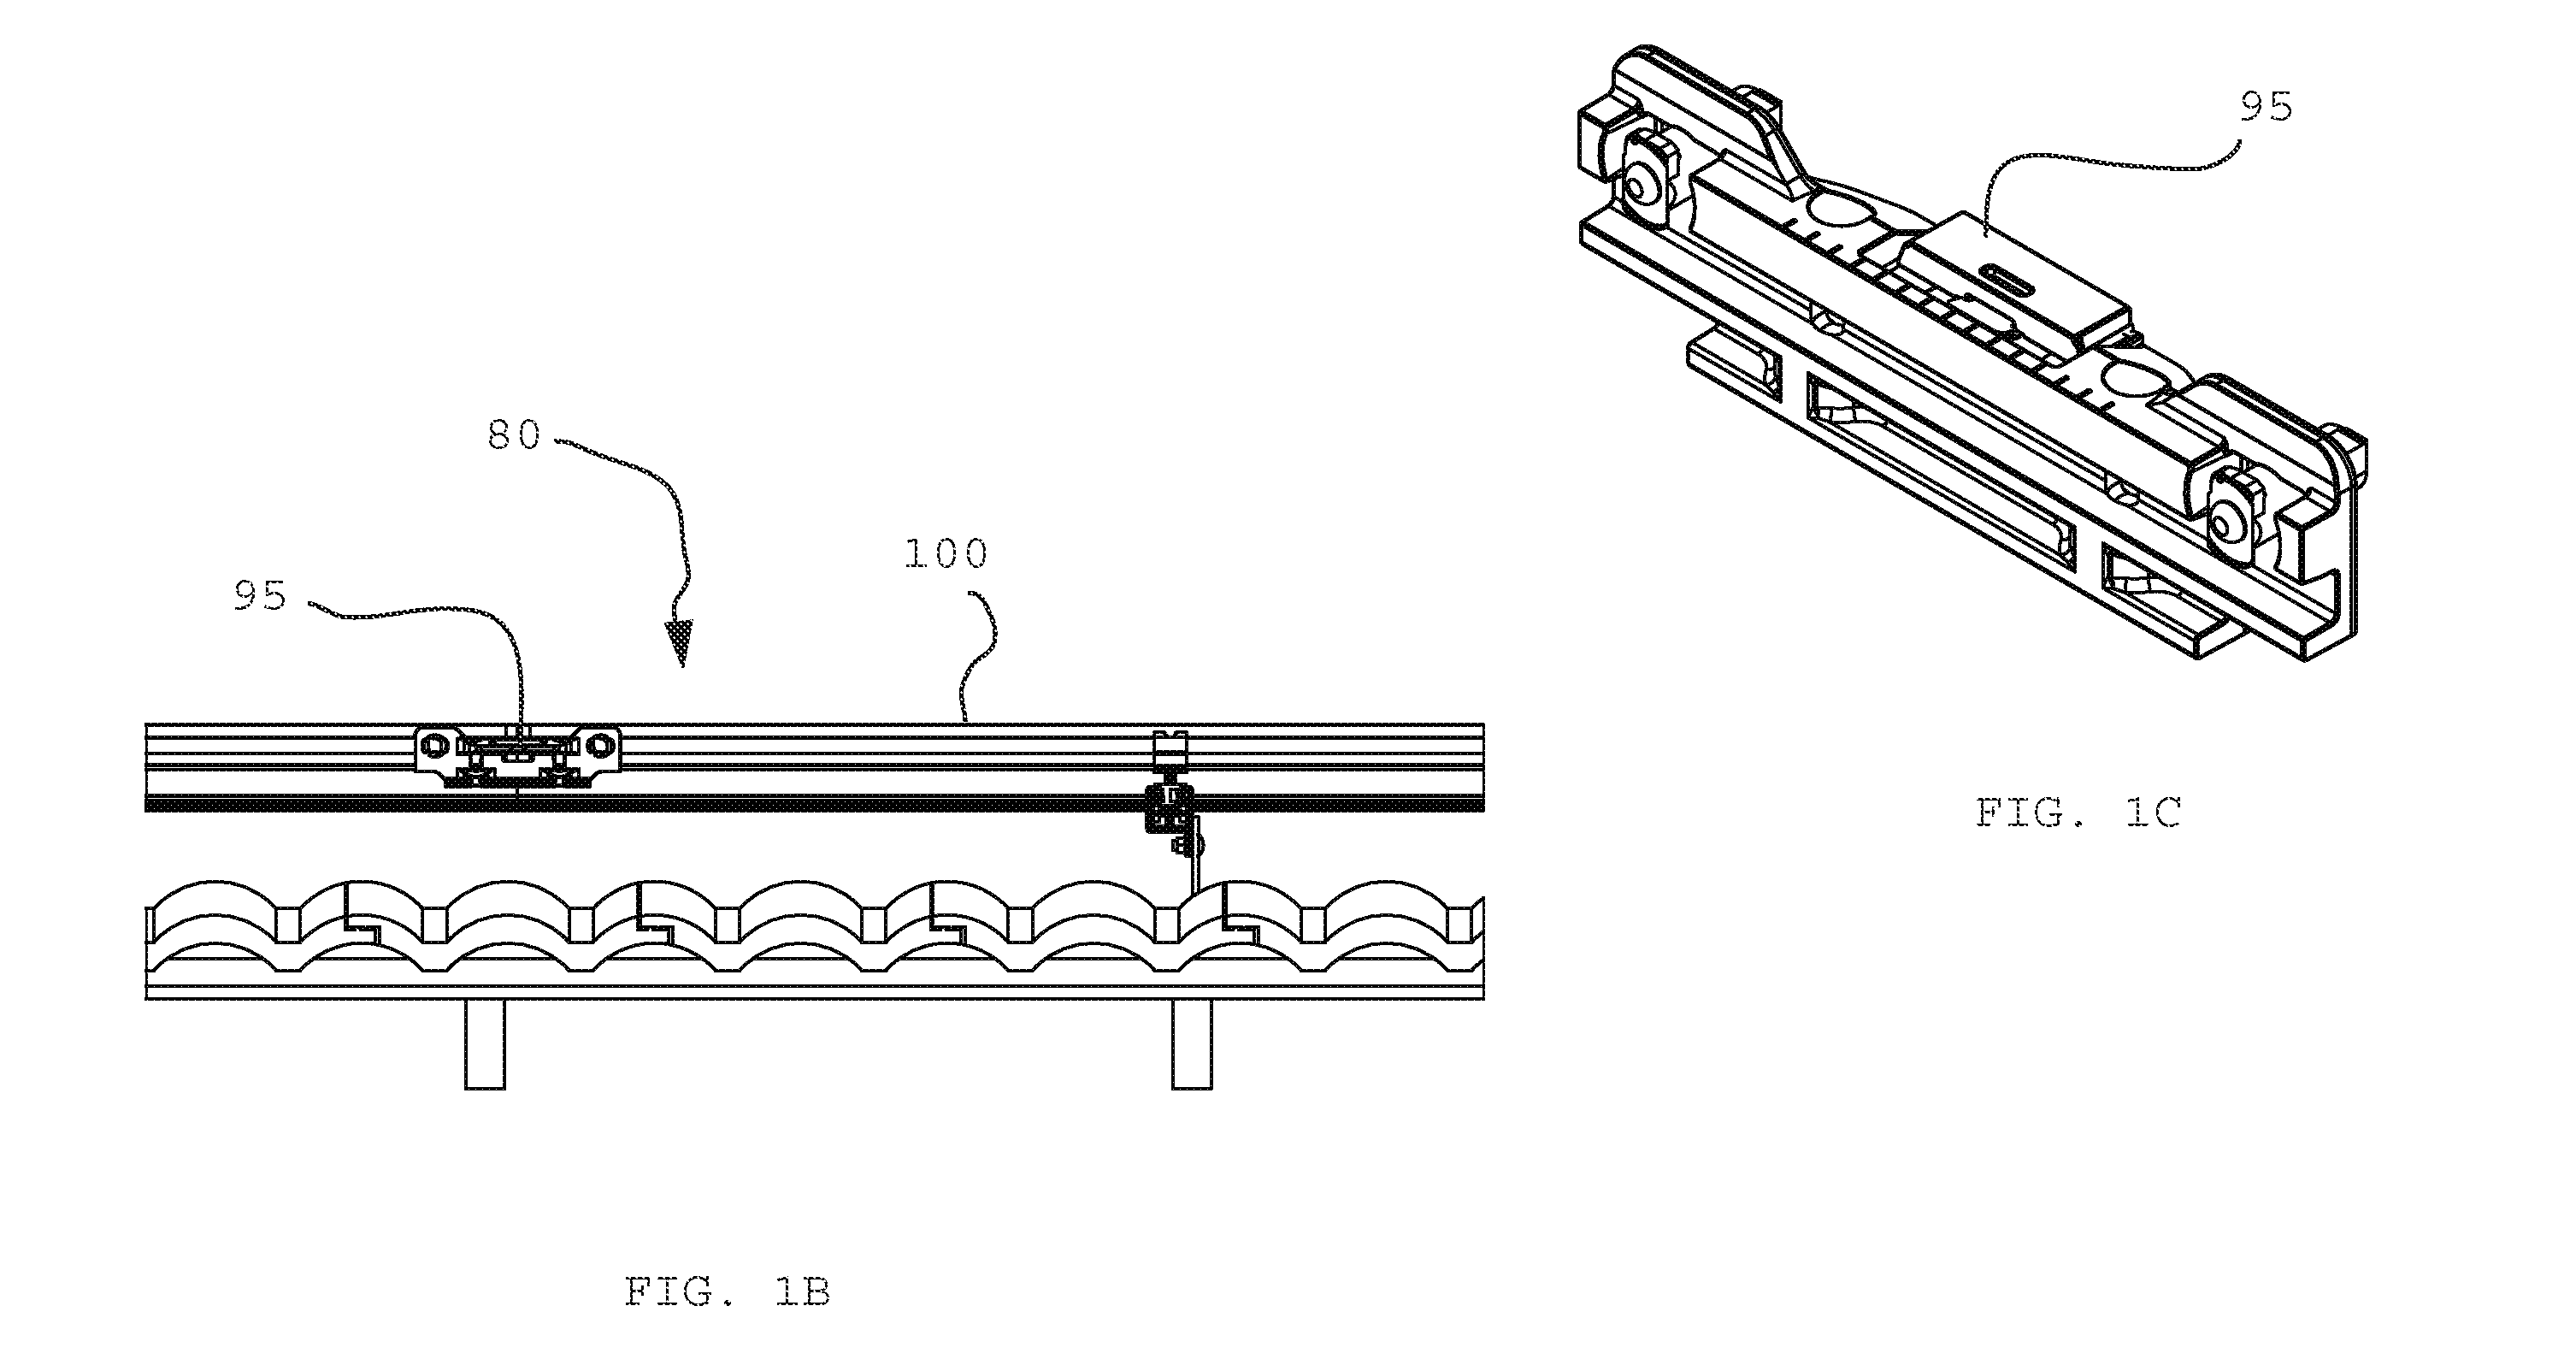 Discrete Attachment Point Apparatus and System for Photovoltaic Arrays